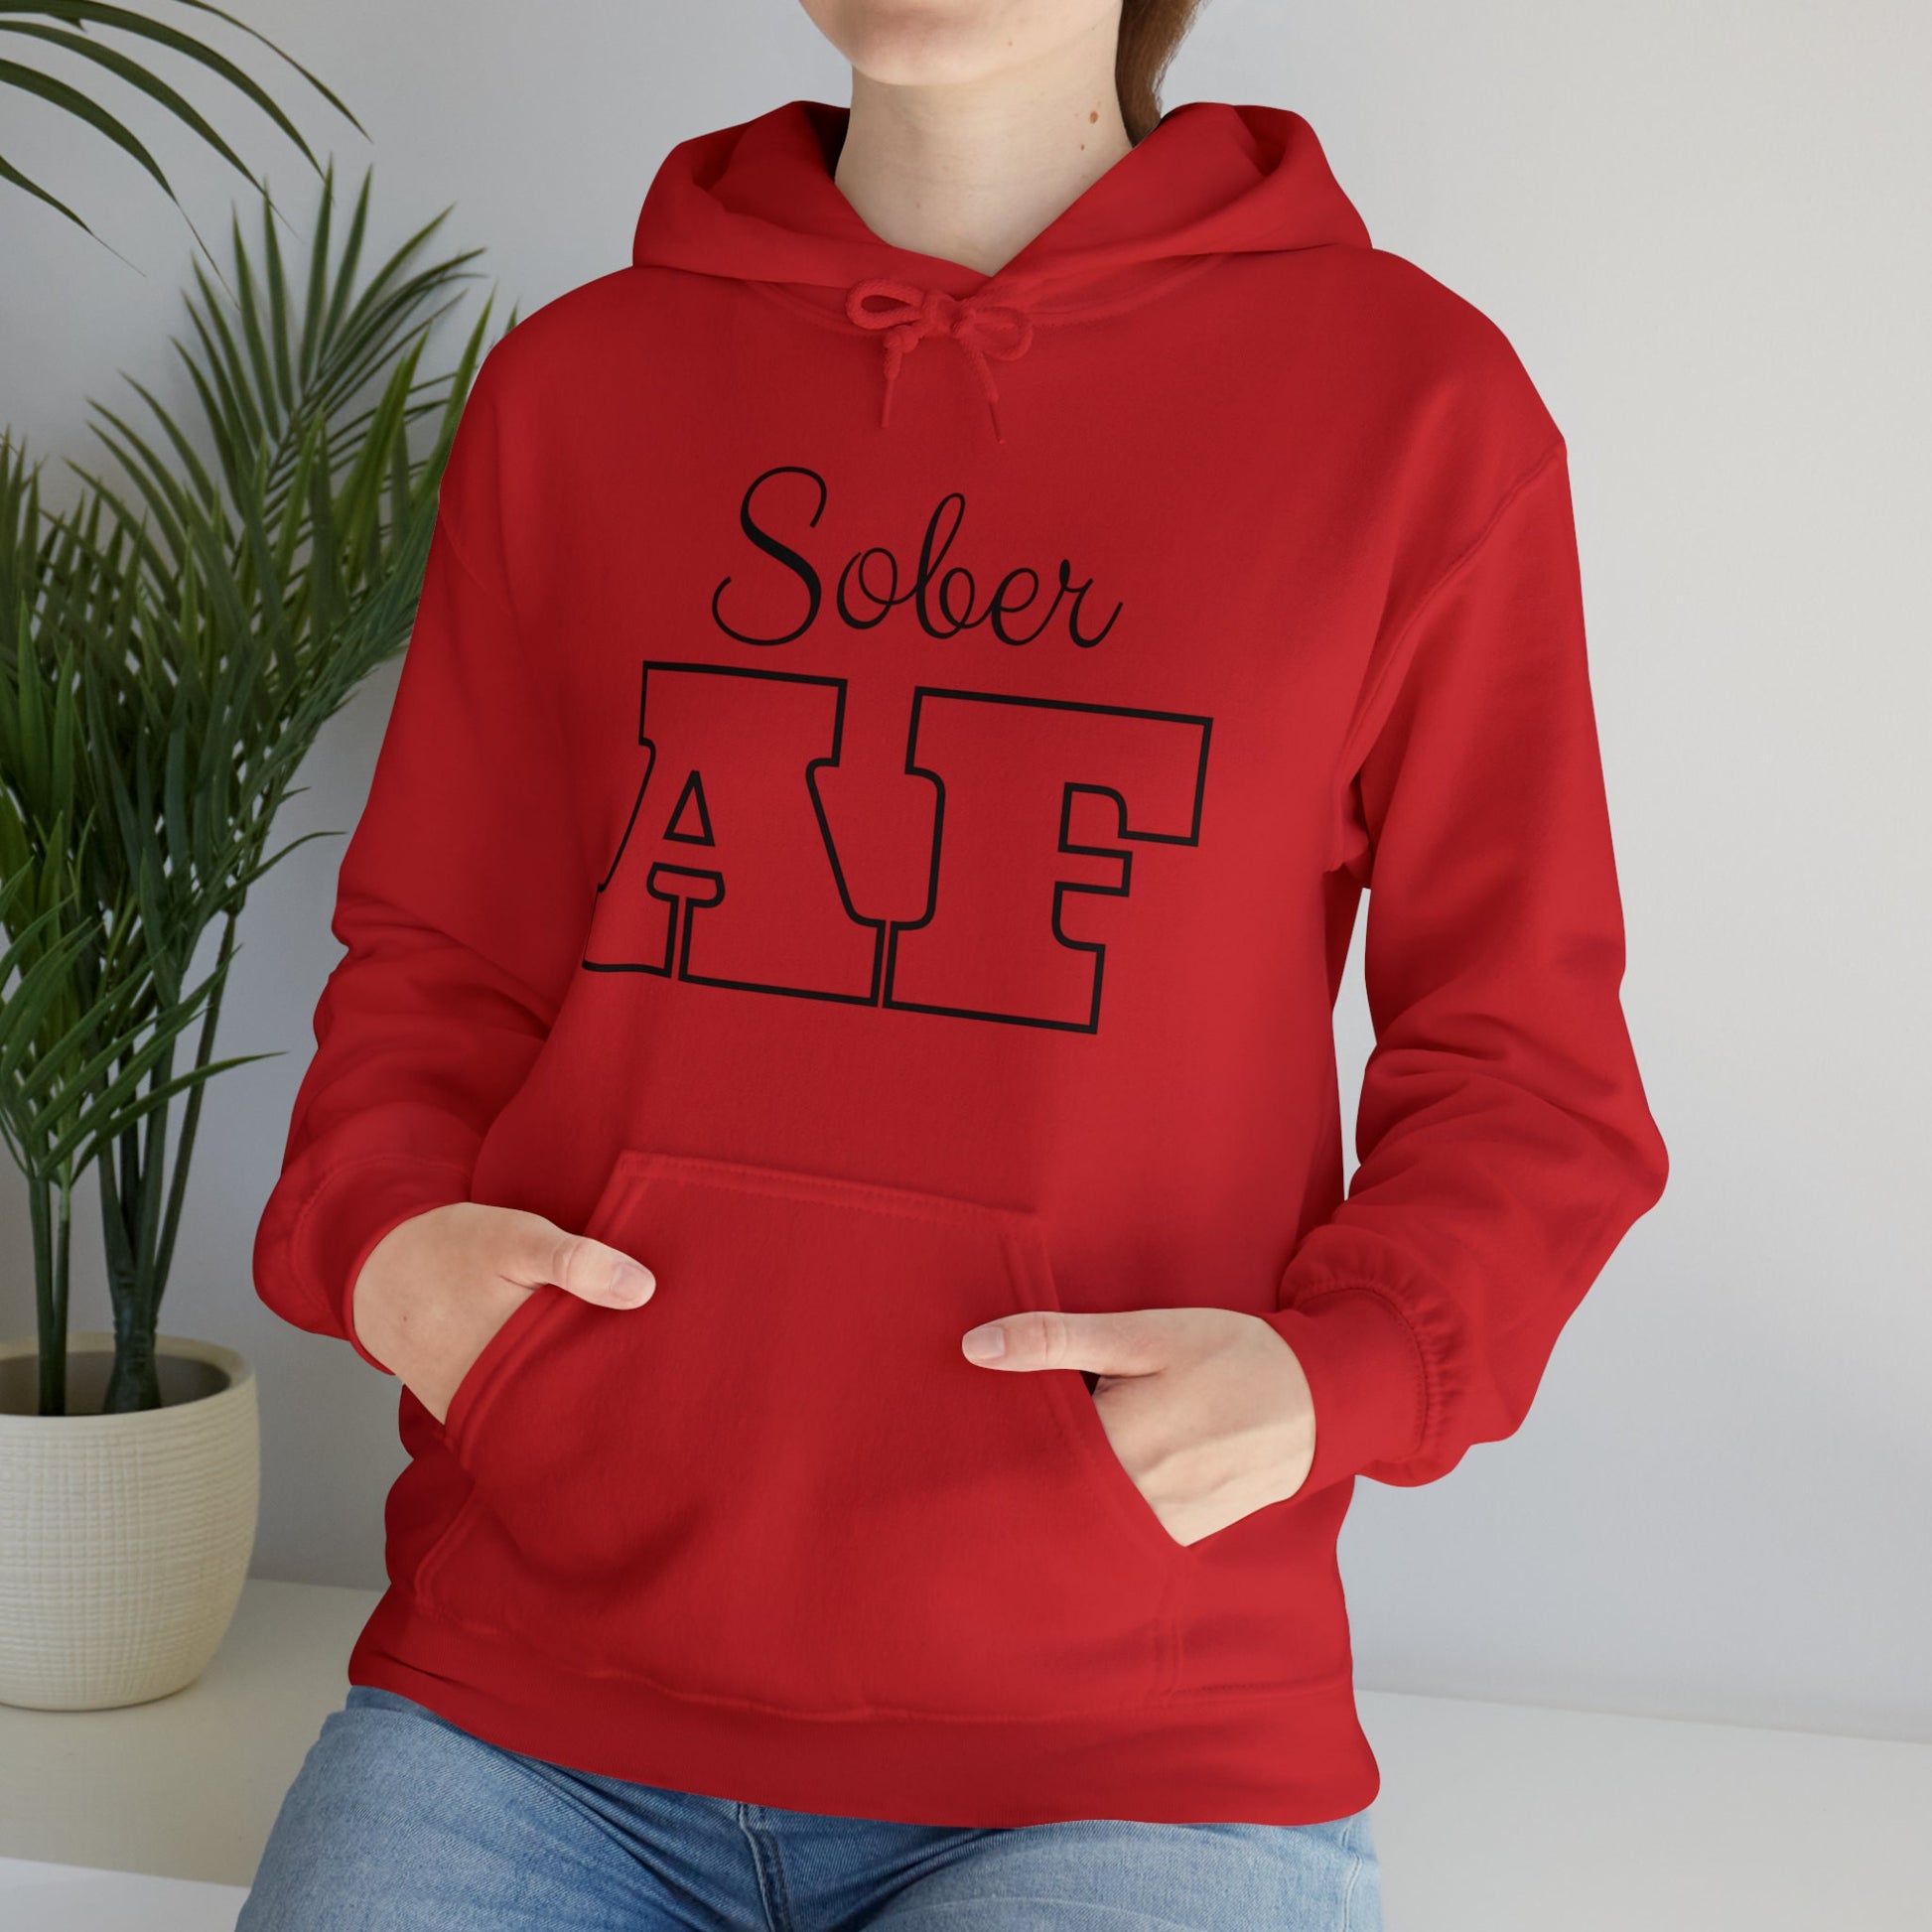 Sober AF Hoodie, Sobriety Pullover, Recovery Hooded Sweatshirt, Recovery Celebration Apparel, AA Shirts, Alcoholic Anonymous Sweatshirt - Red